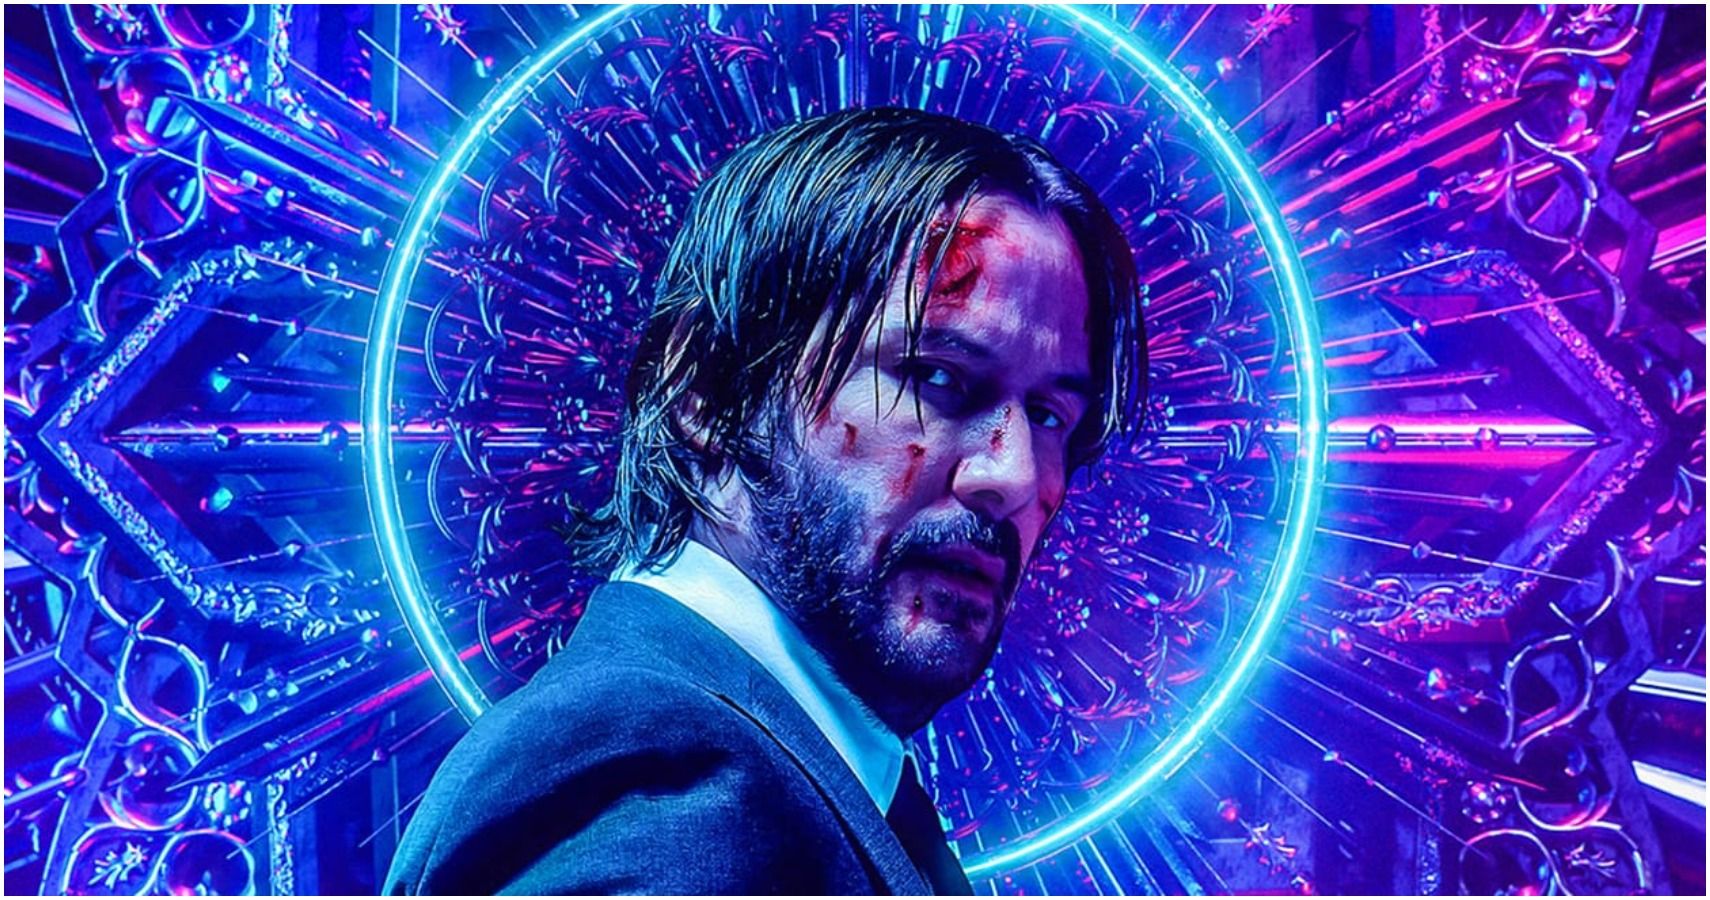 Decorate Your Room In Style With These Killer John Wick Collectibles